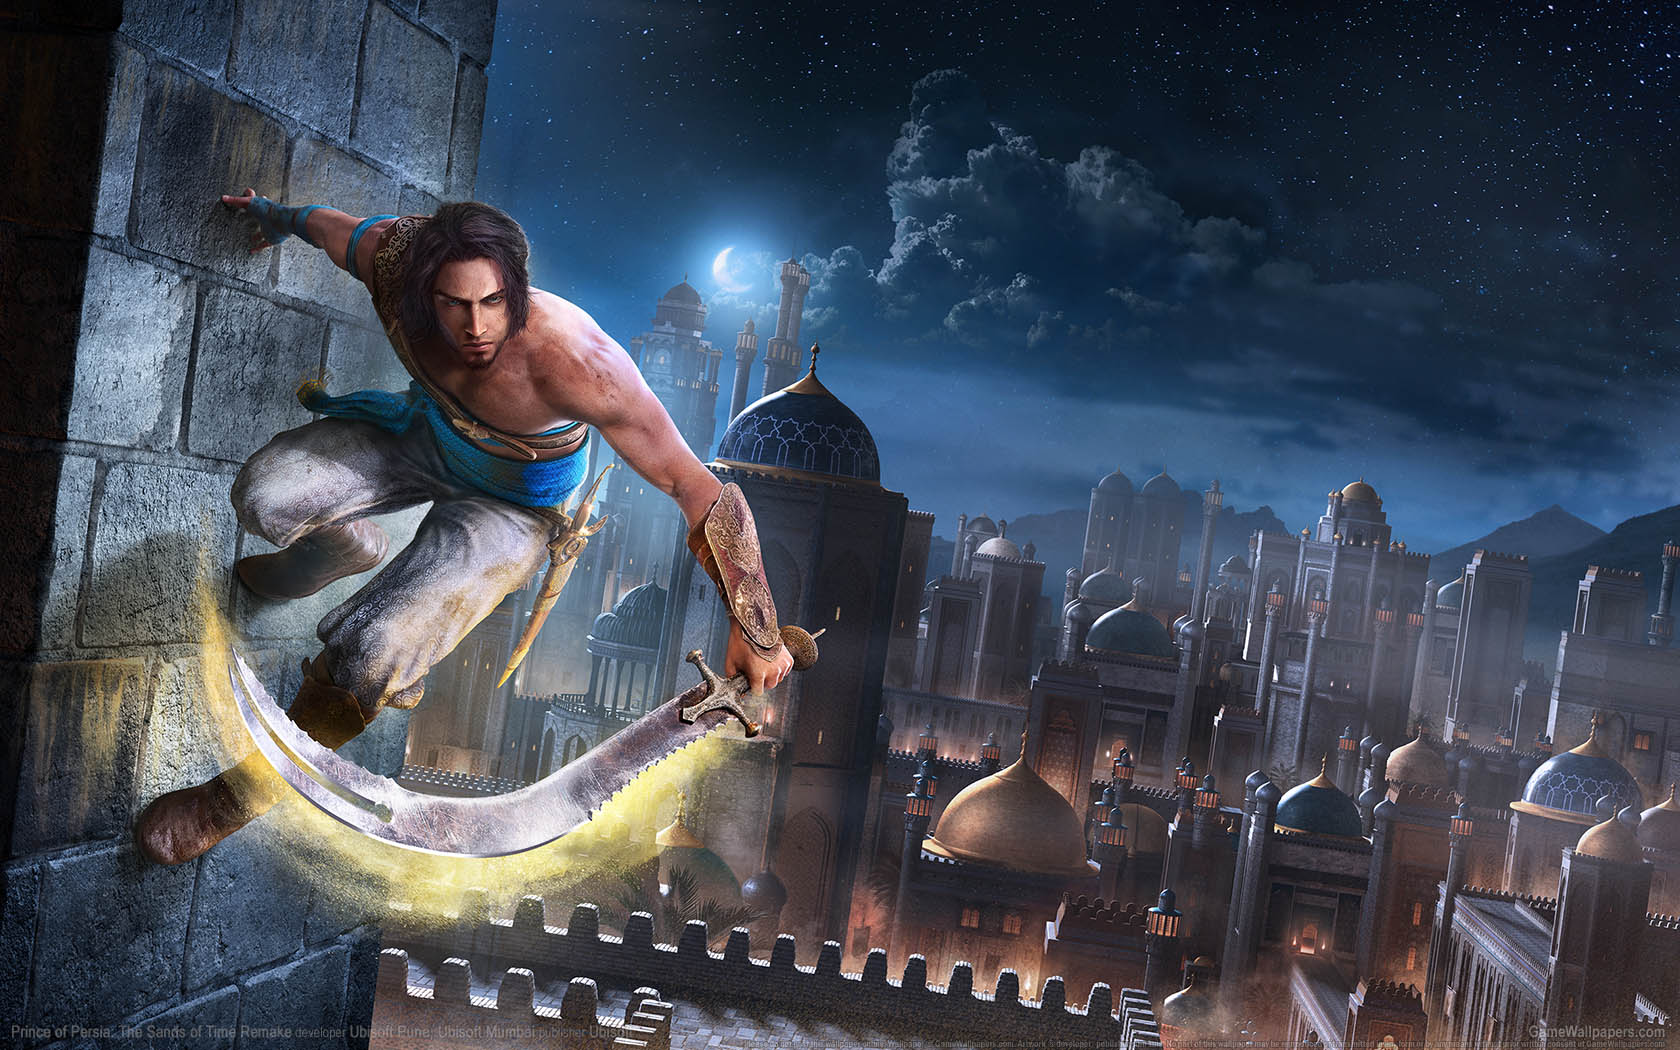 Prince of Persia: The Sands of Time Remake fond d'cran 01 1680x1050